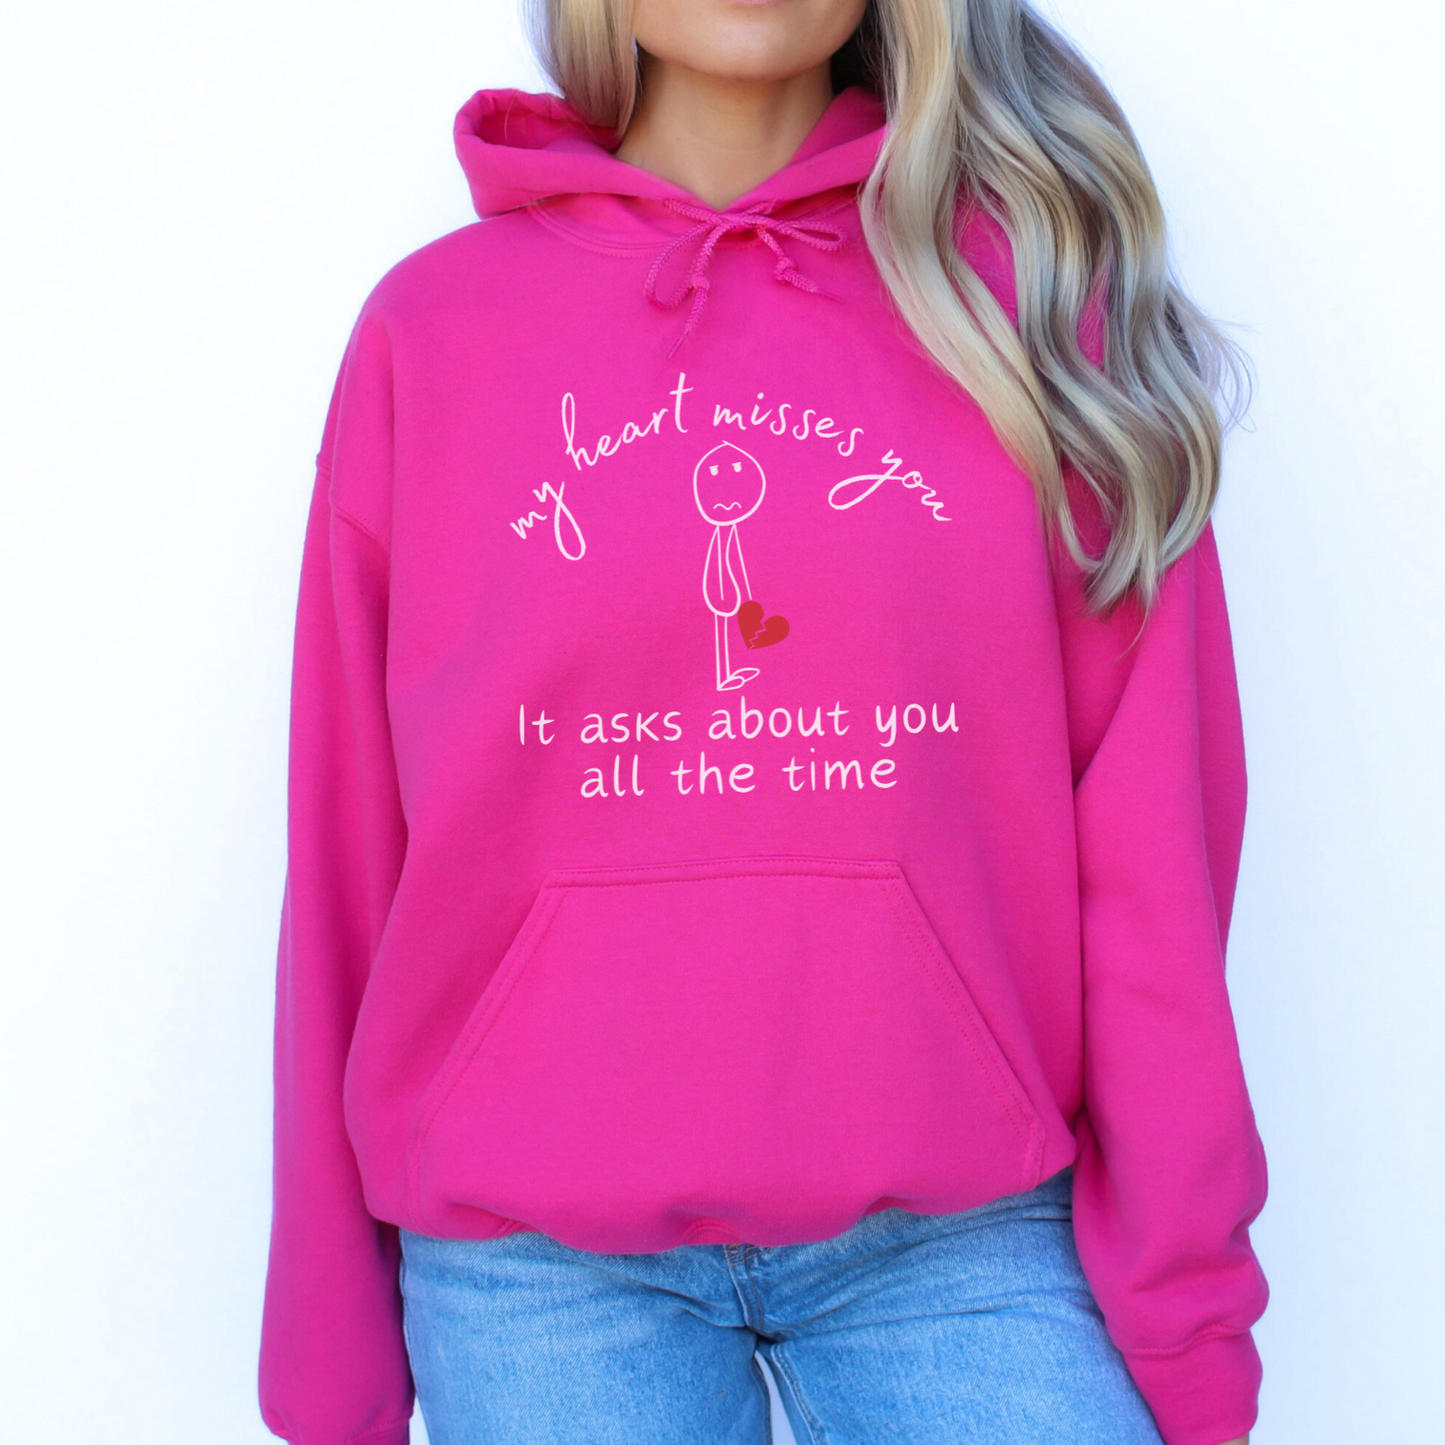 Heliconia Gildan 18500 hoodie sweatshirt - keep the memory of your loved on close with this cozy hooded sweatshirt. Heartfelt quote about missing someone with a sad stick figure that symbolizes love and loss.